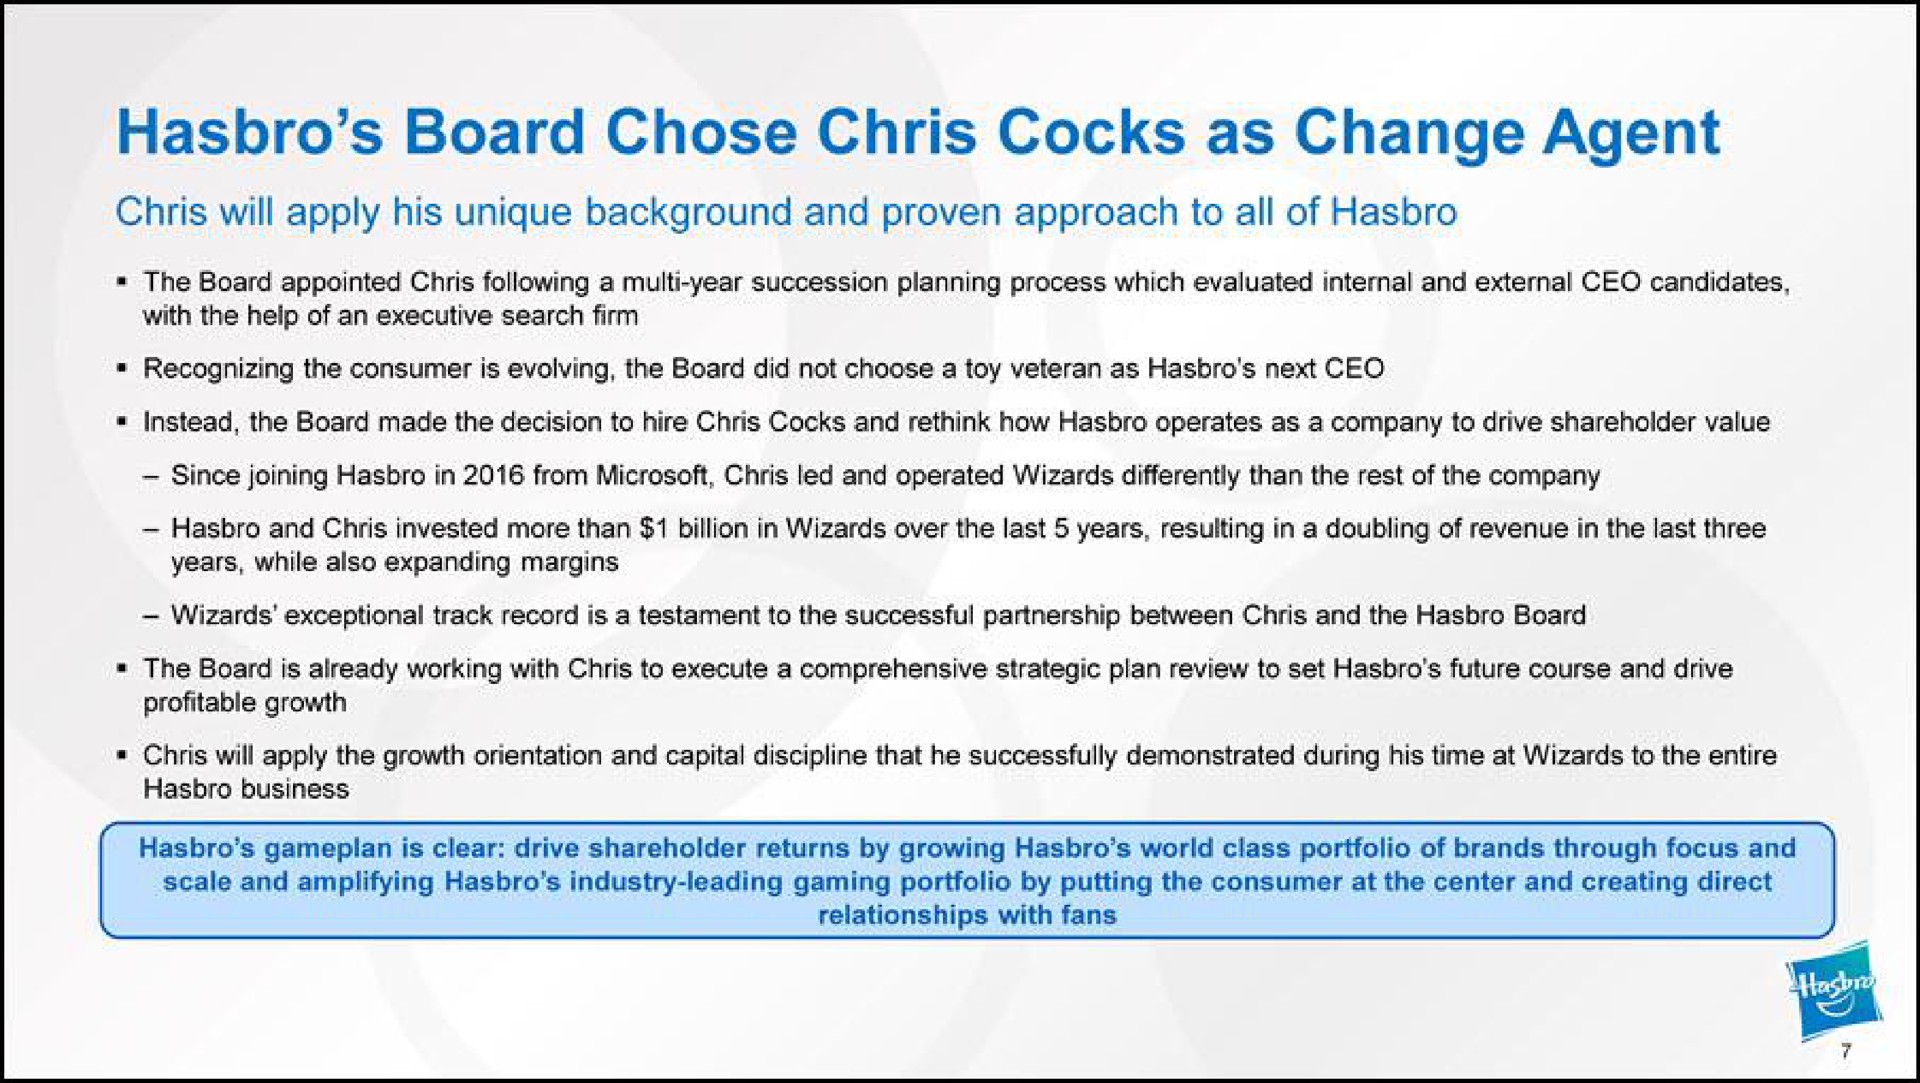 board chose cocks as change agent will apply his unique background and proven approach to all of | Hasbro